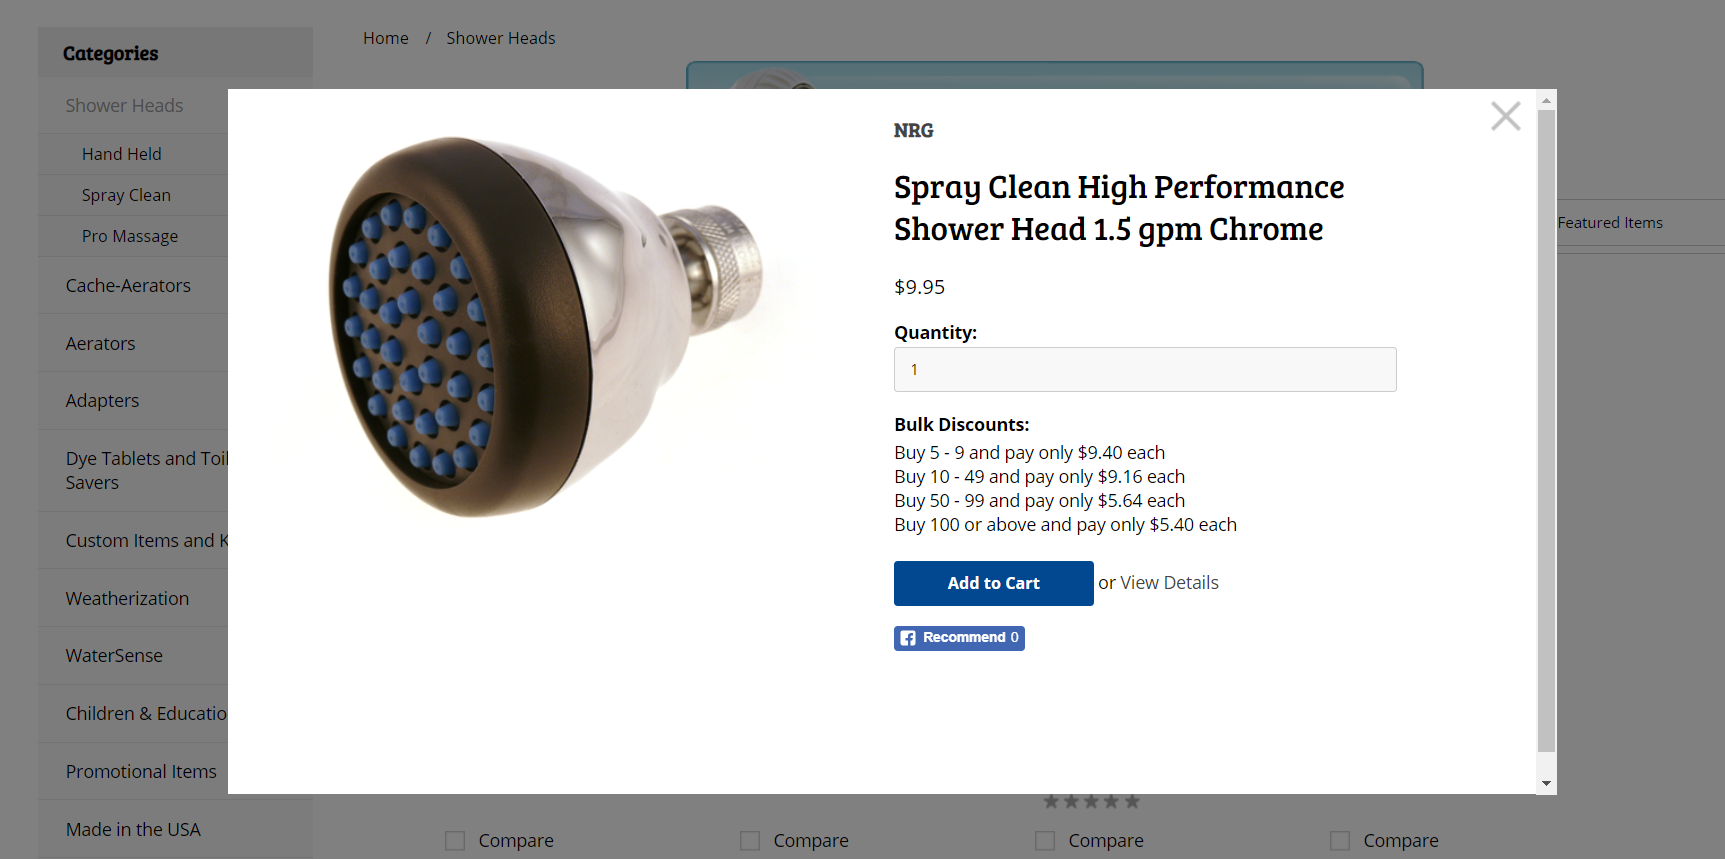 Quick view of price breaks for one of our spray clean water saving shower heads